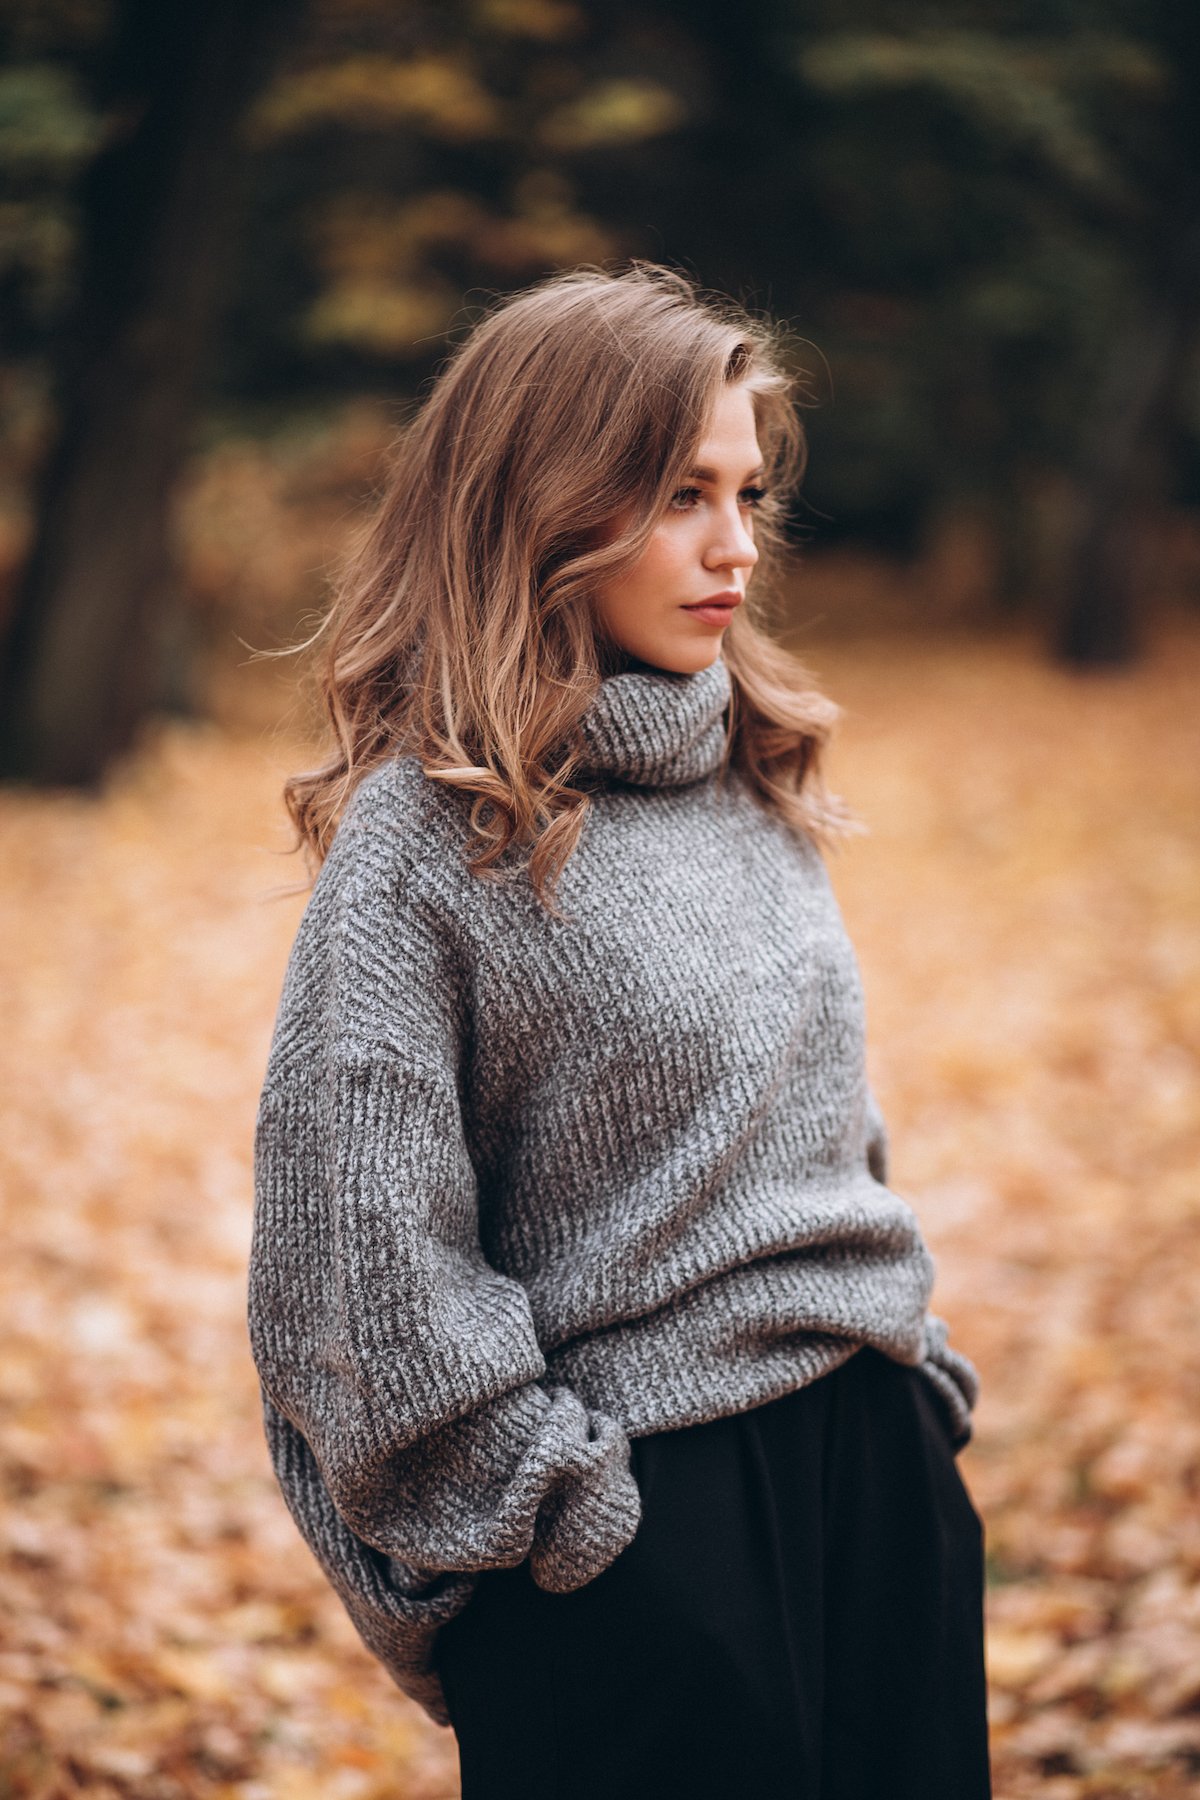 14 Sweater Outfit Ideas For Chilly Weather